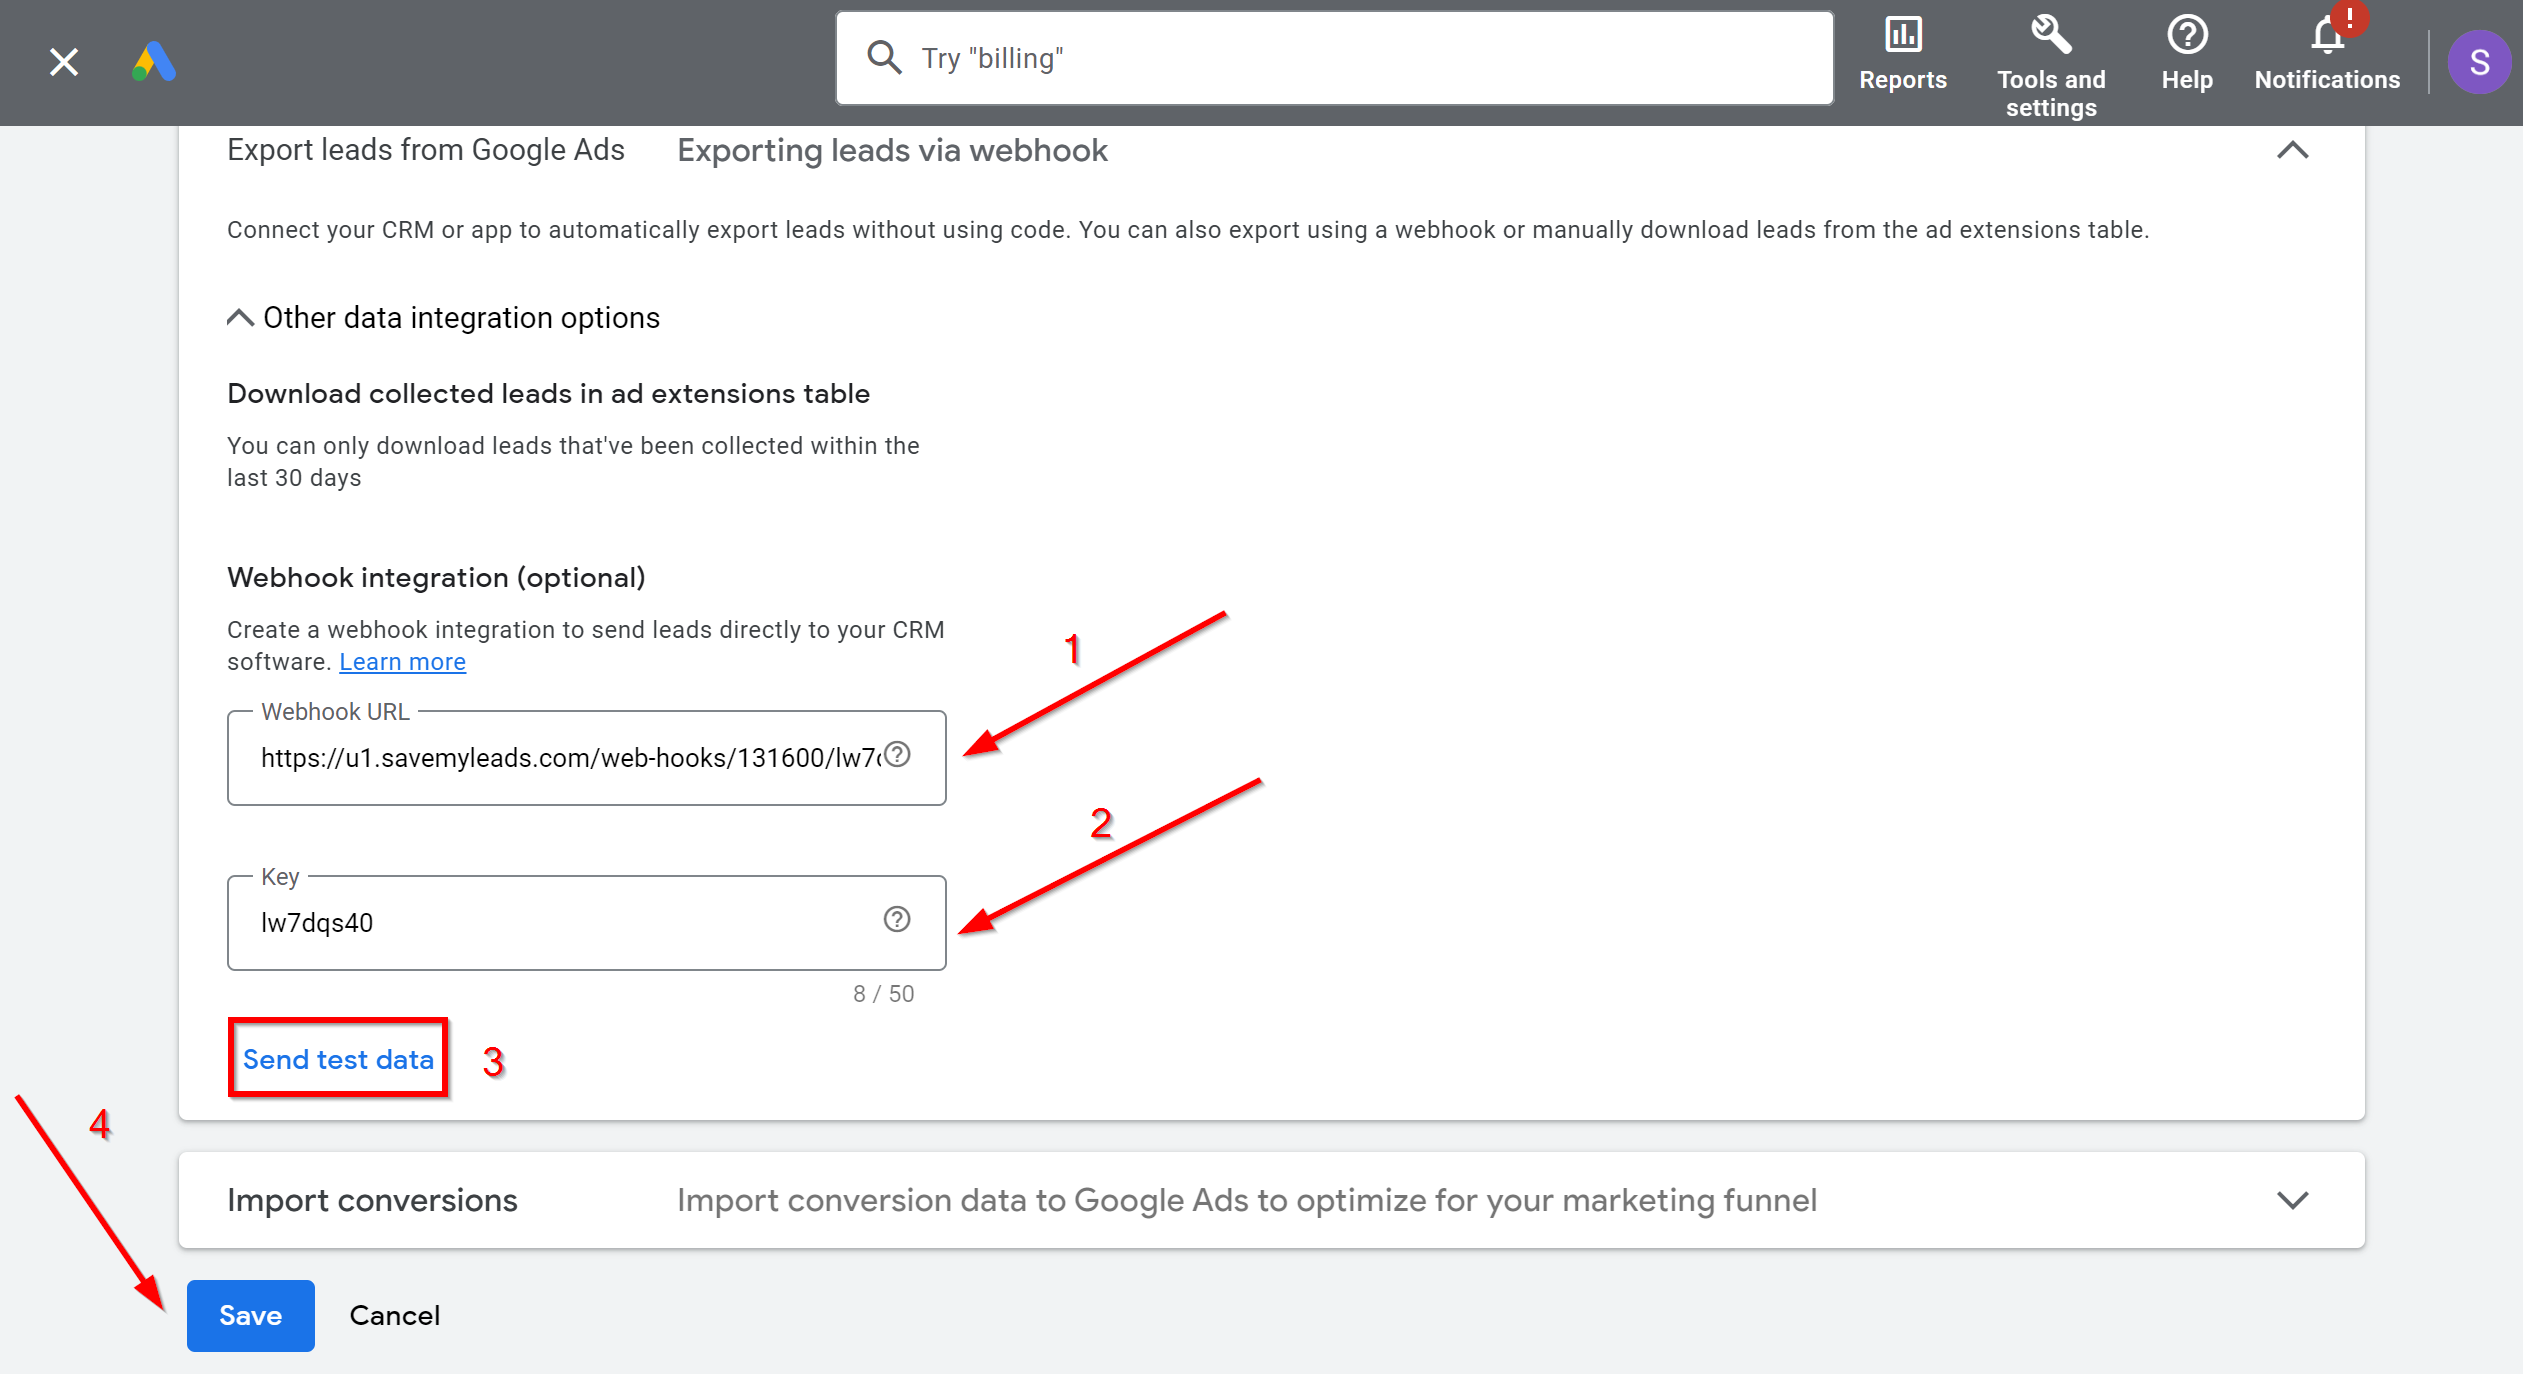 How to Connect Google Lead Form with Telnyx | Data Source account connection